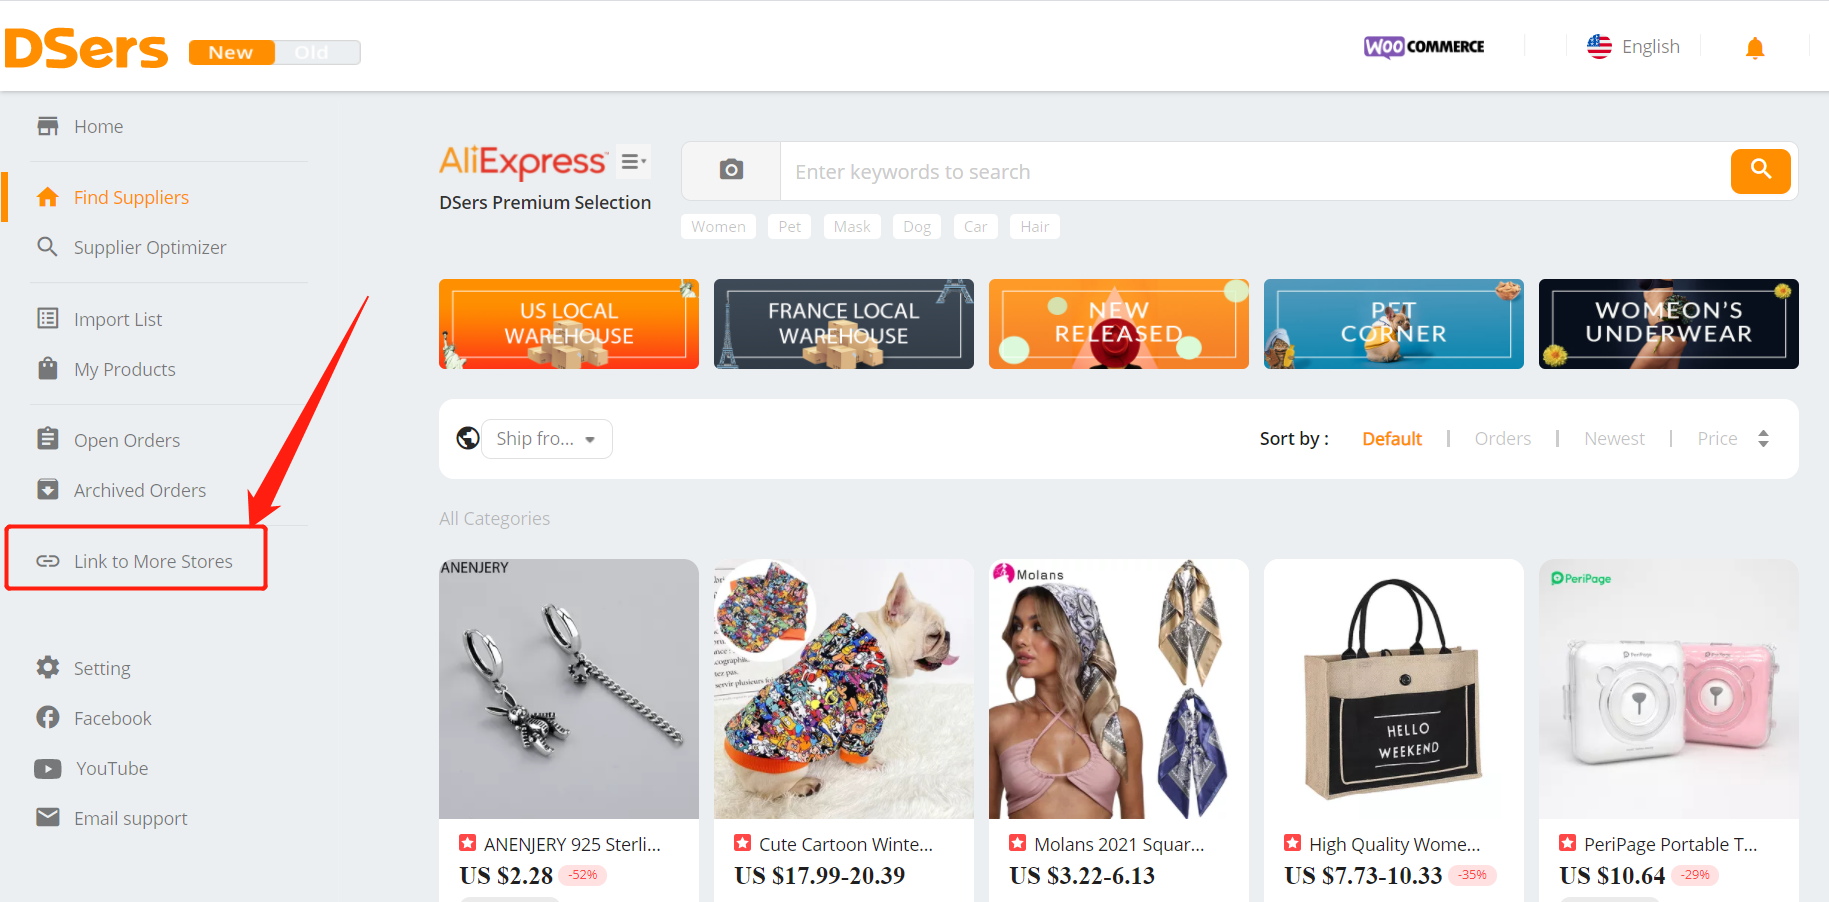 Add a WooCommerce store with Woo DSers - Link to more stores - Woo DSers